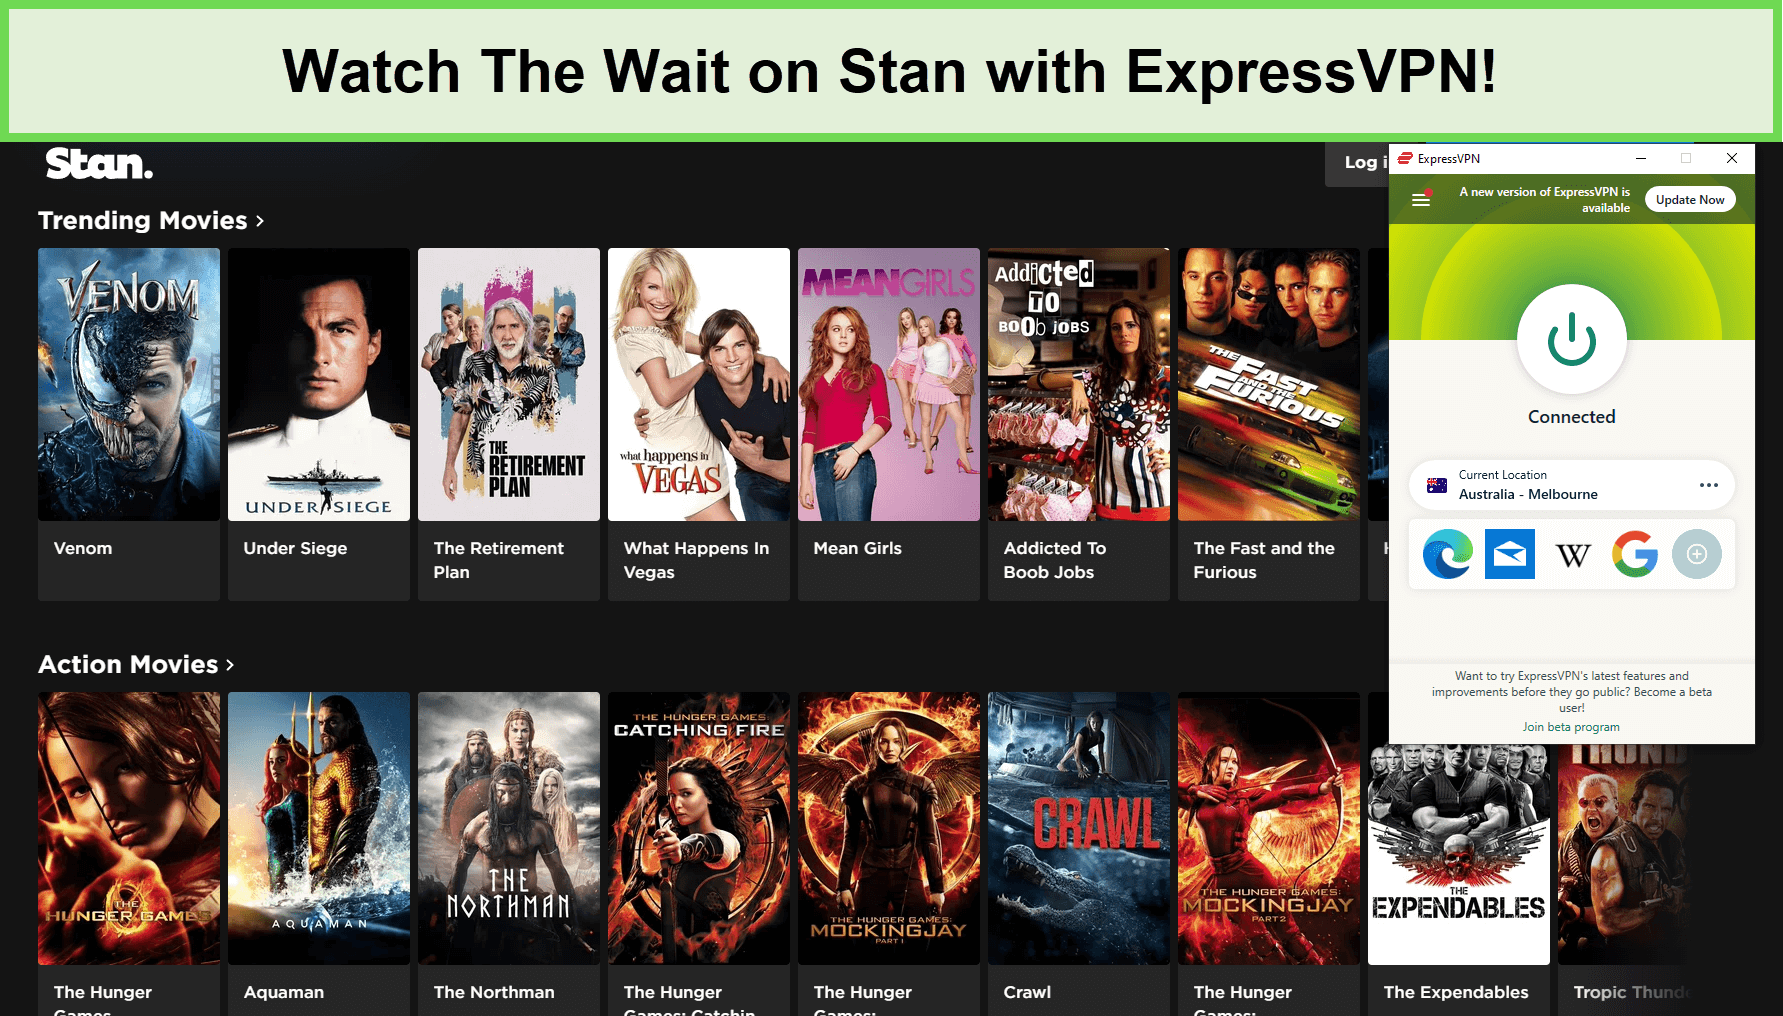 Watch-The-Wait-in-Spain-on-Stan-with-ExpressVPN